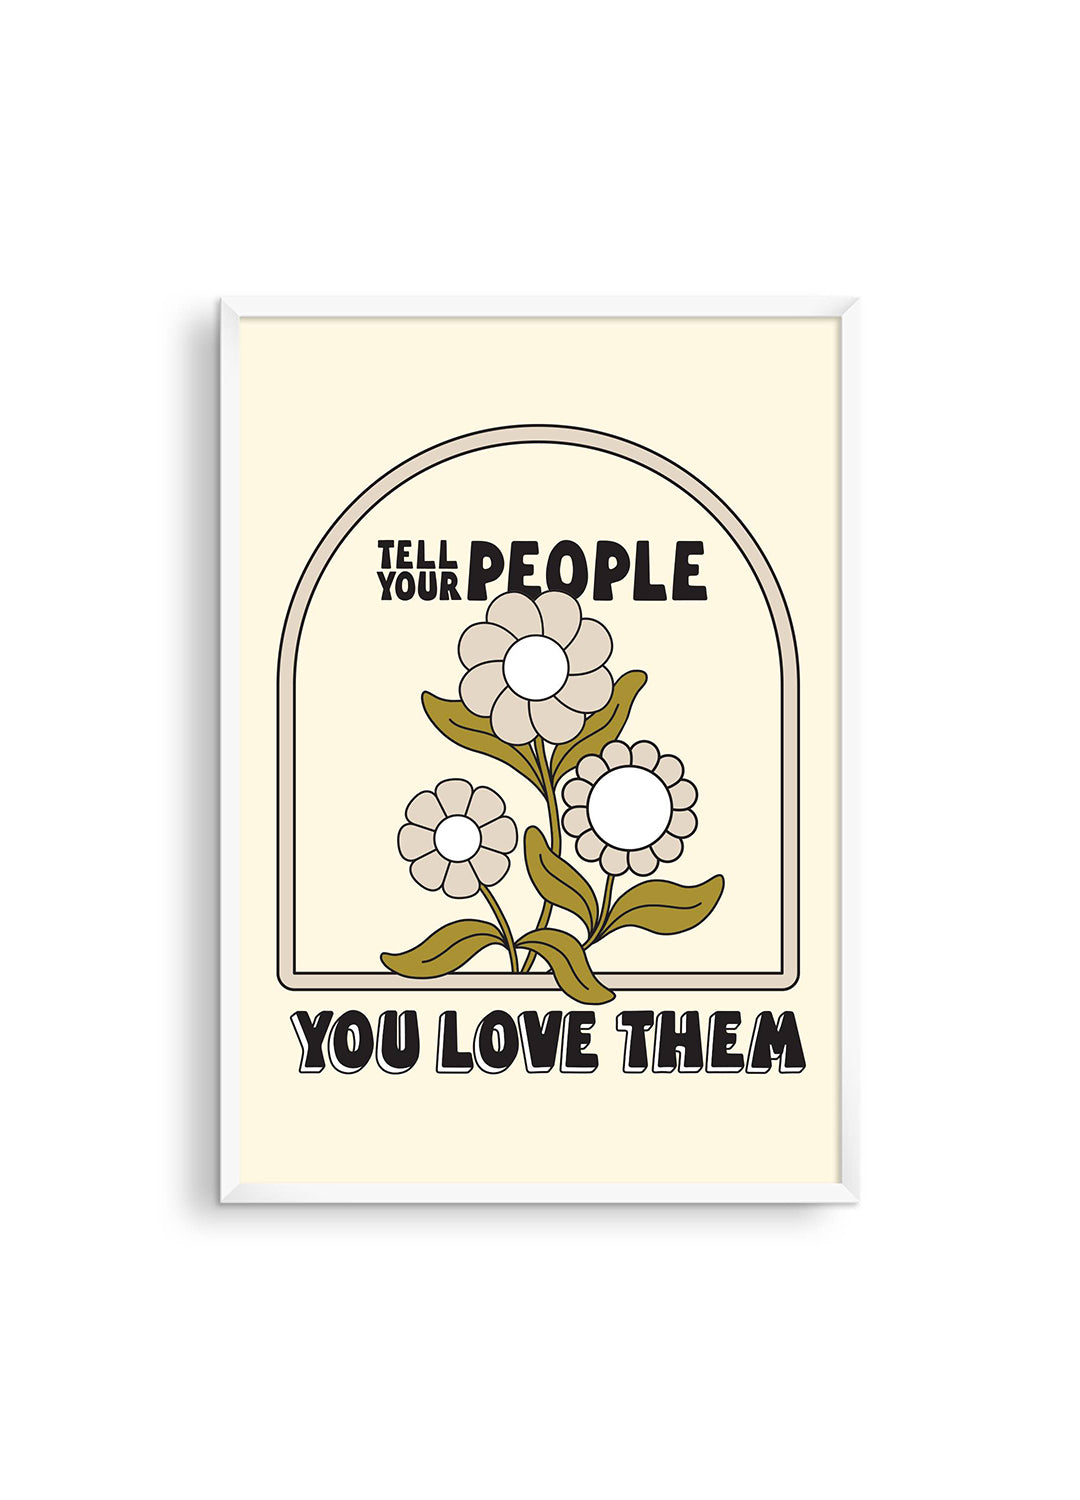 Tell Your People You Love Them Print